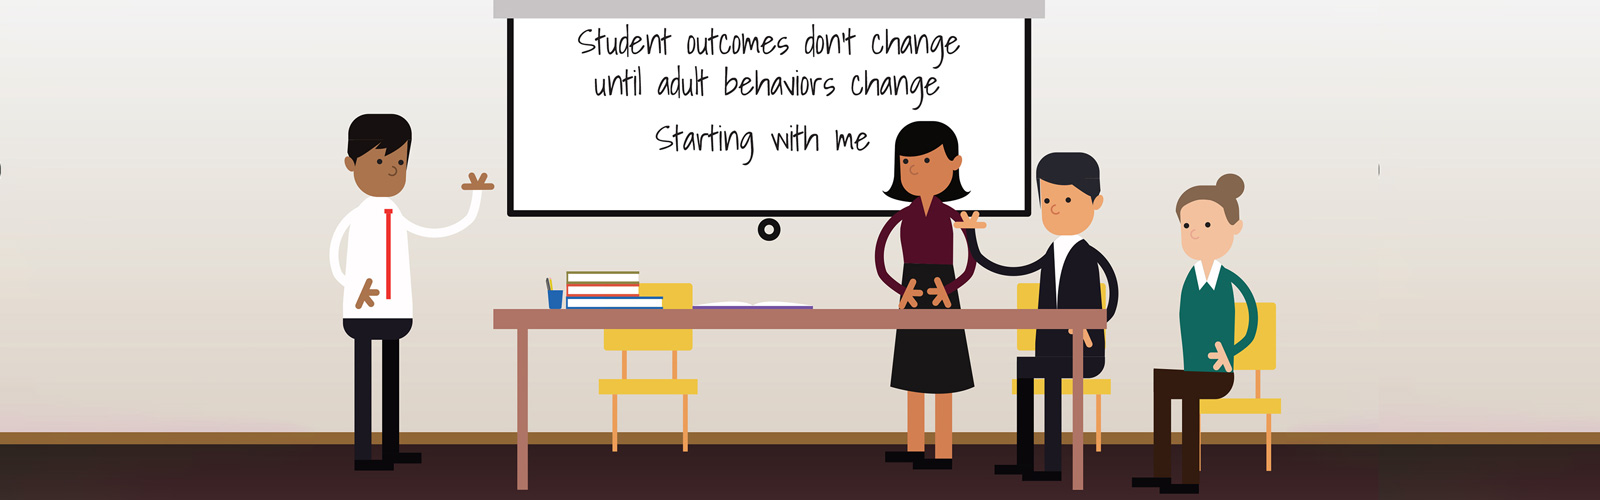 Student outcomes don't change until adult behaviors change. Starting with me.